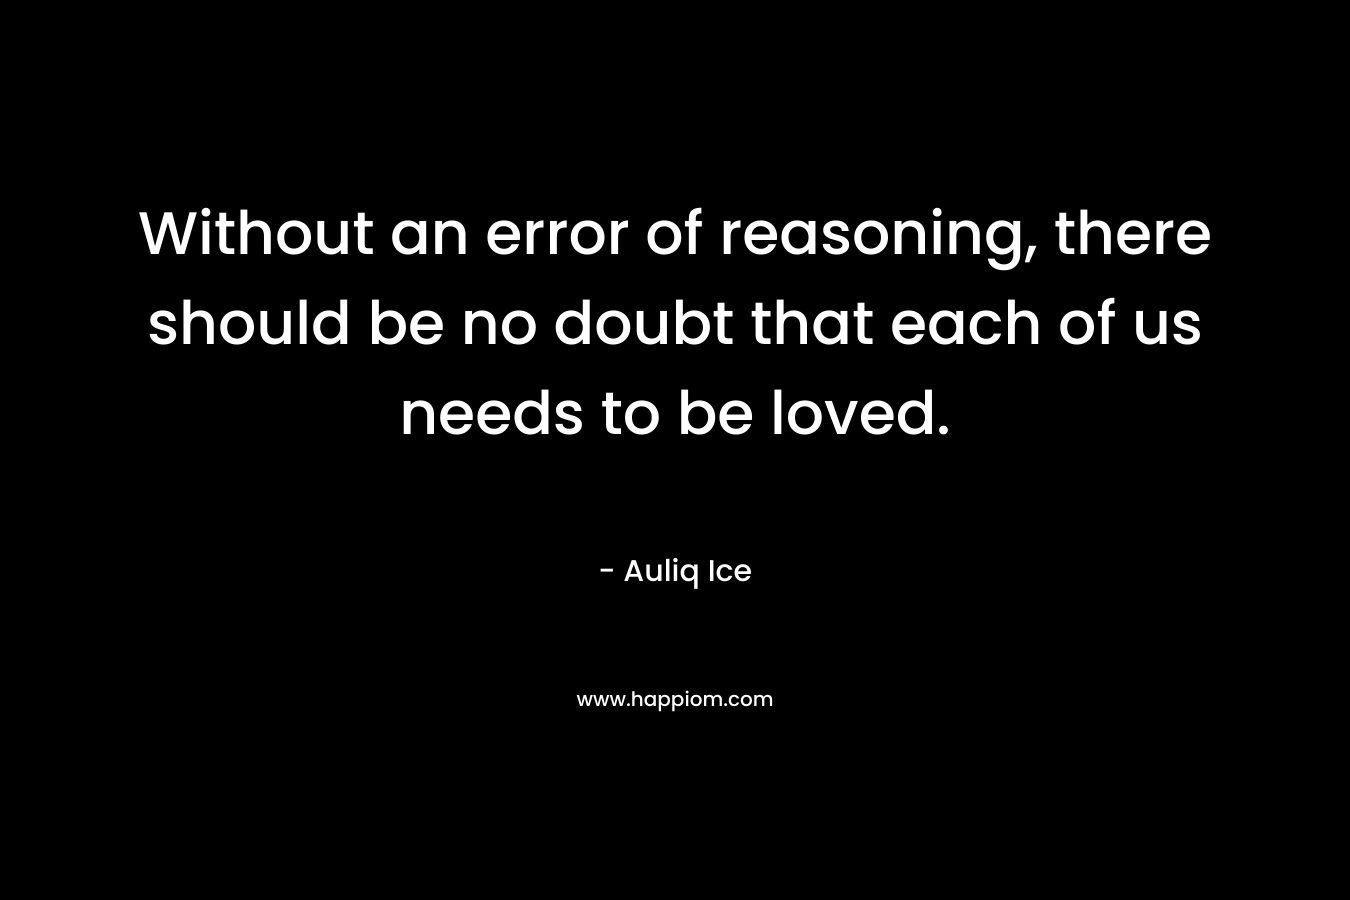 Without an error of reasoning, there should be no doubt that each of us needs to be loved. – Auliq Ice